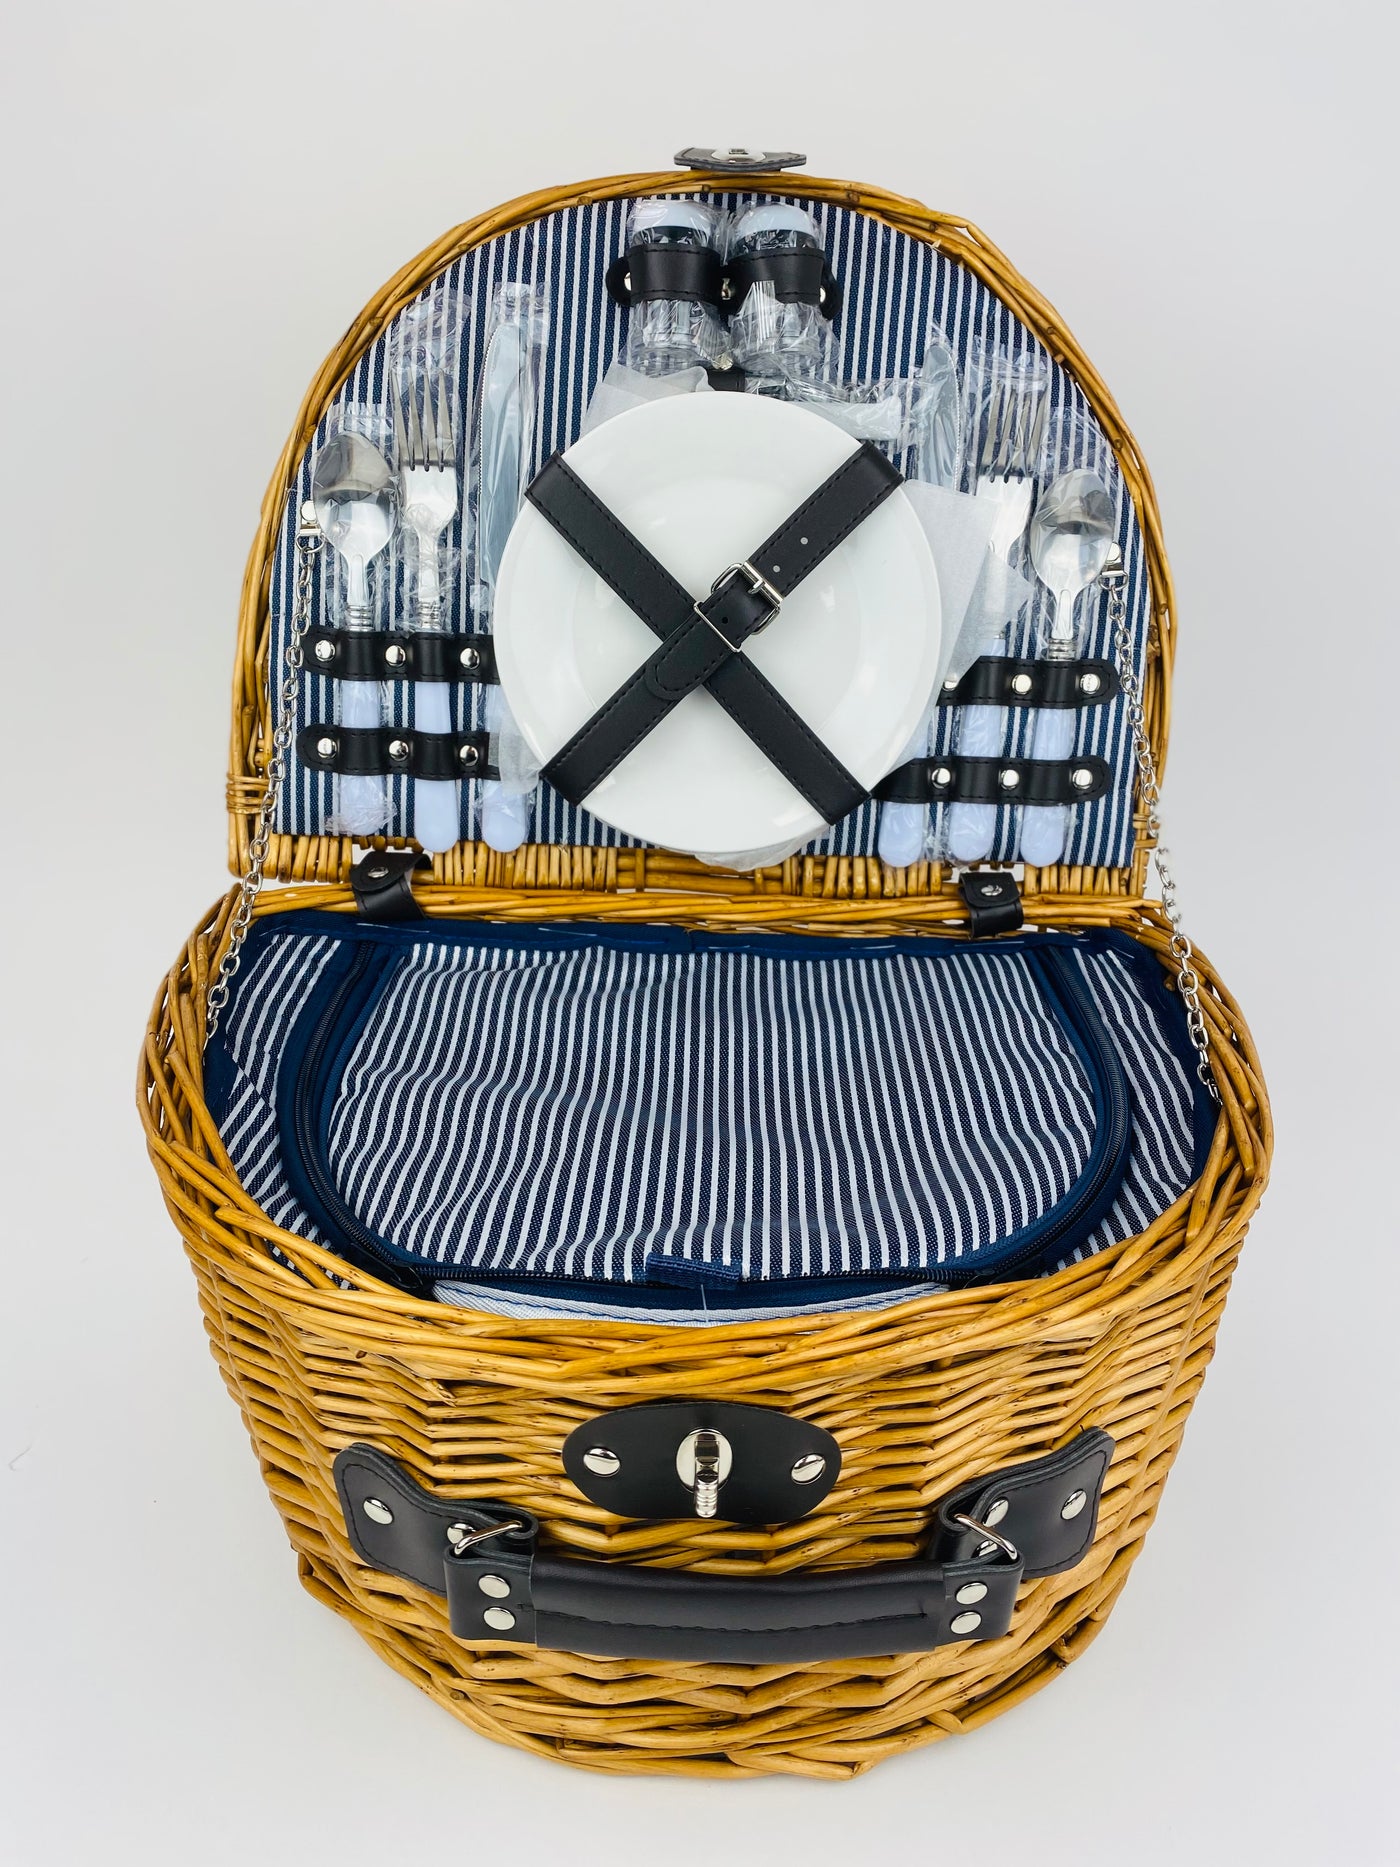 Hand-made Picnic Baskets from Spain!